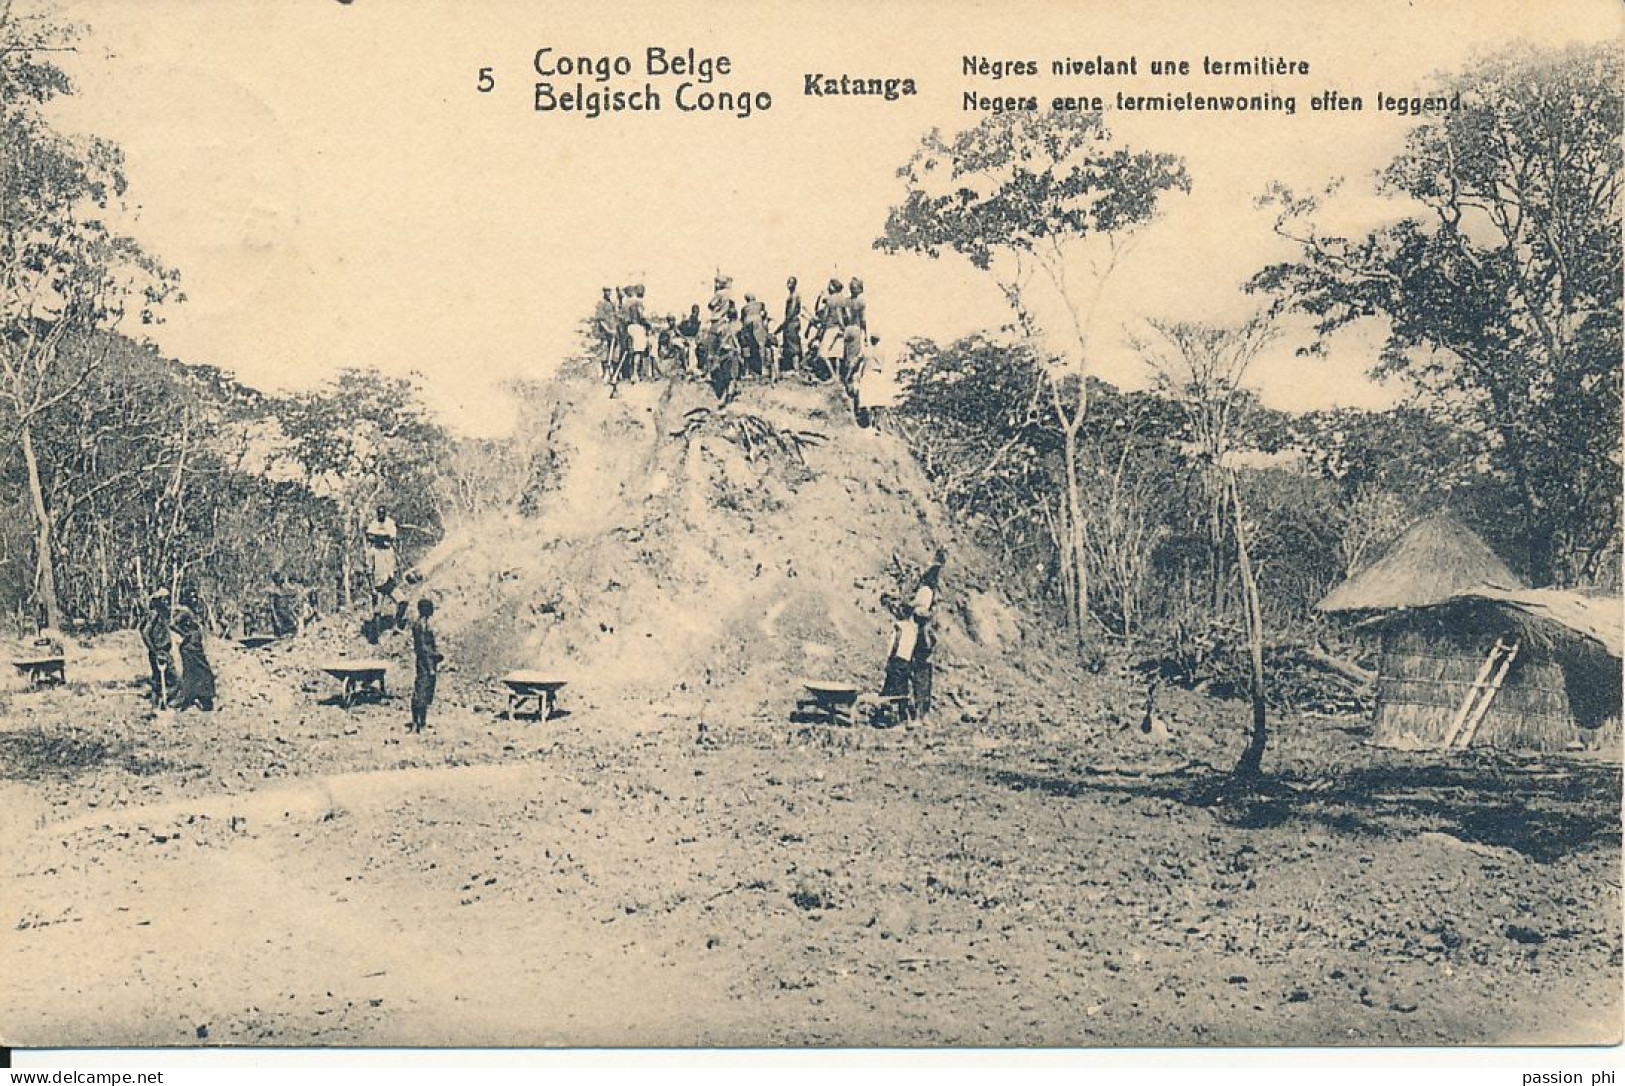 B6 BELGIAN CONGO PPS SBEP 43 VIEW 5 USED - Entiers Postaux